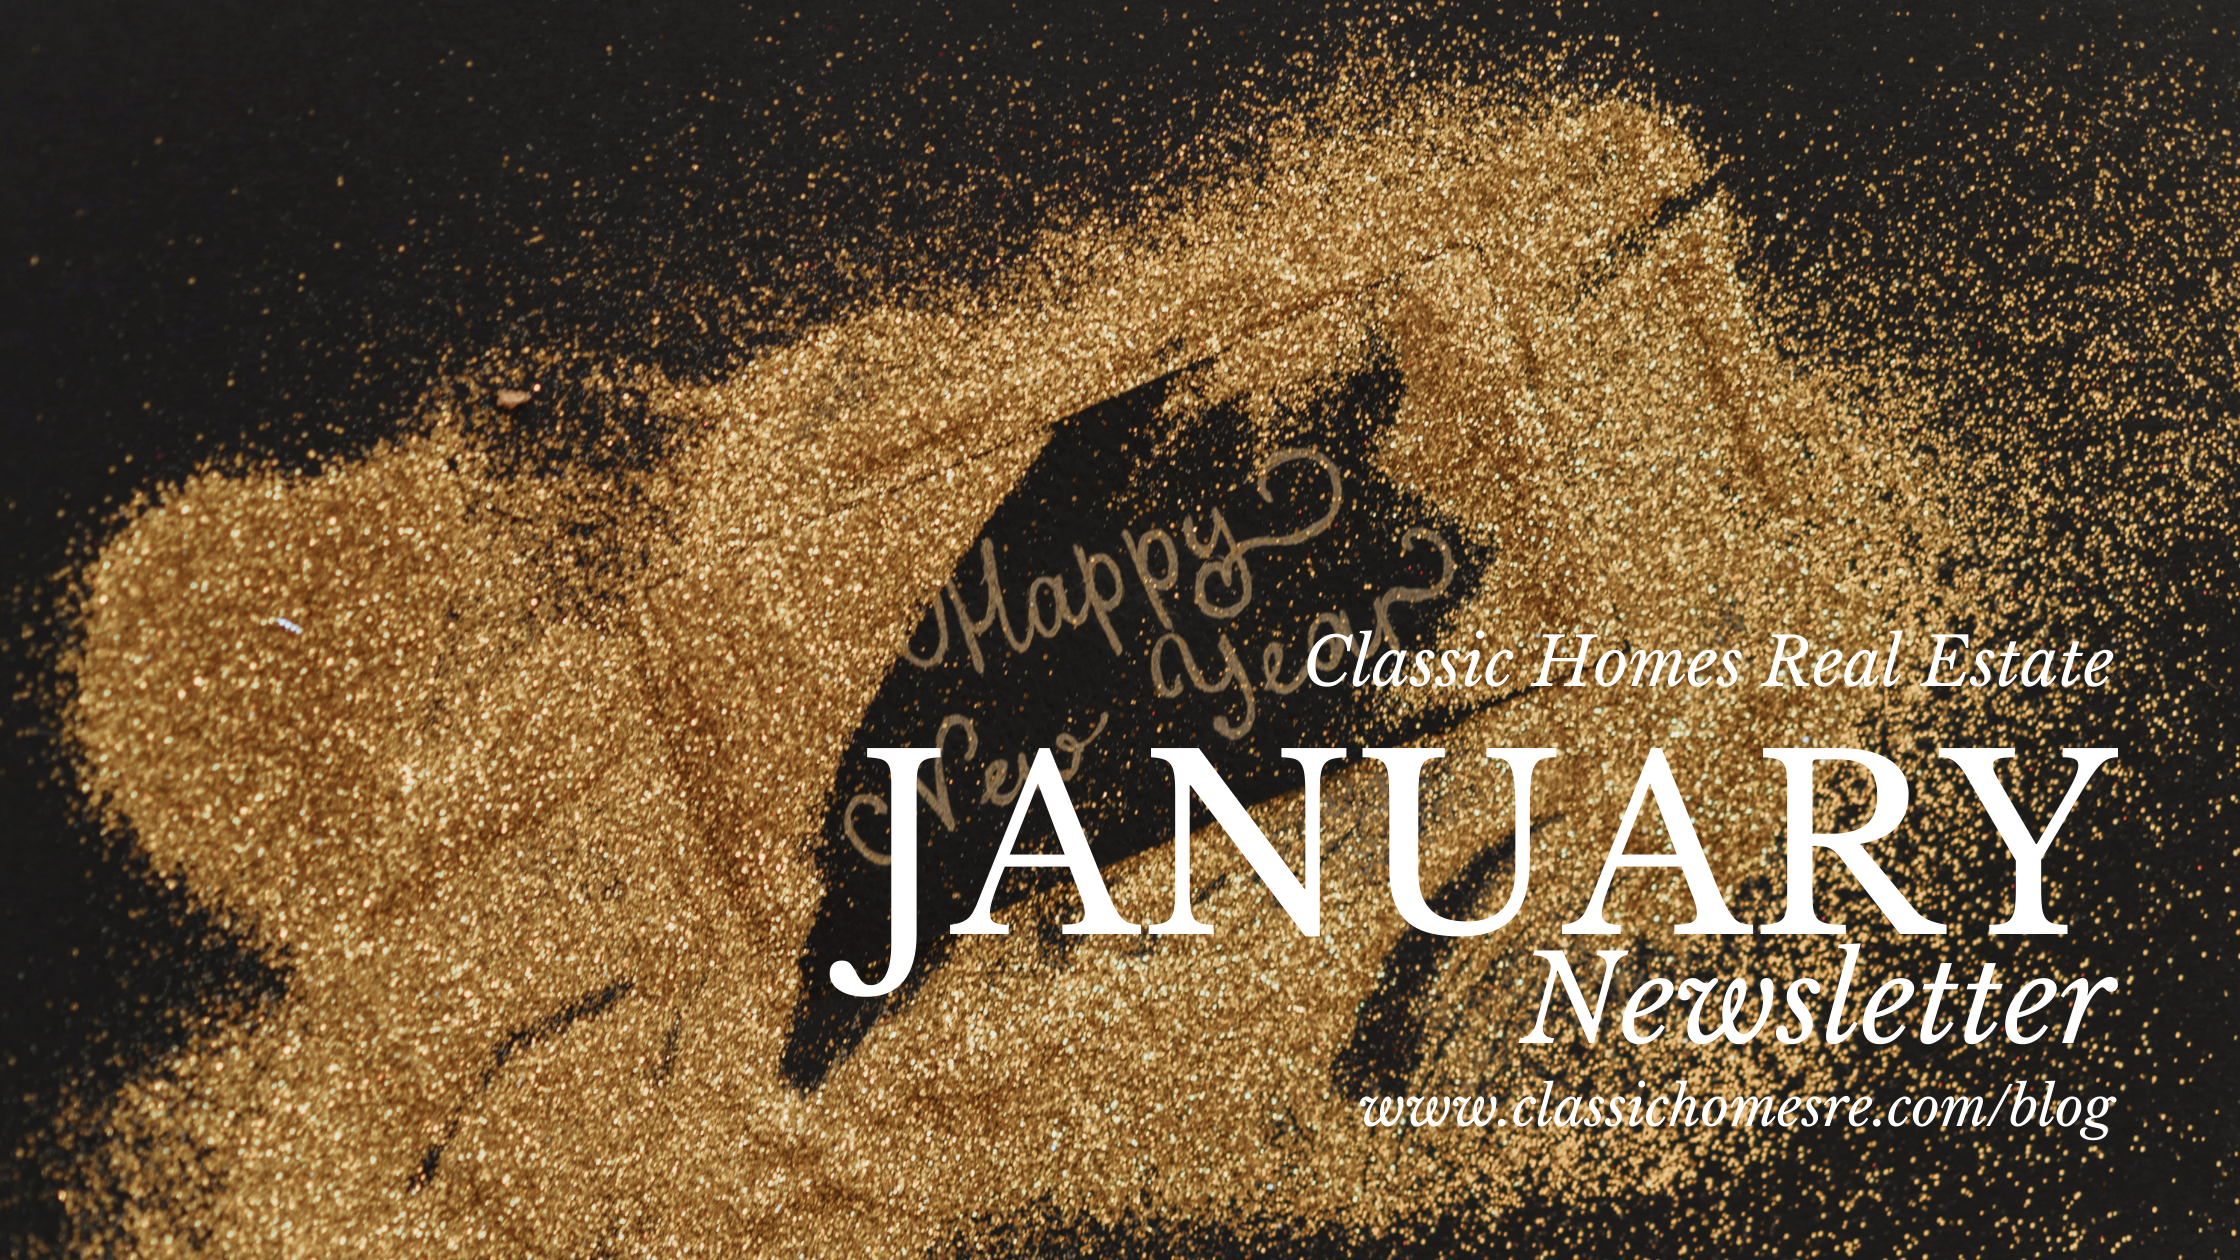 Classic Homes Real Estate Newsletter - Month of January